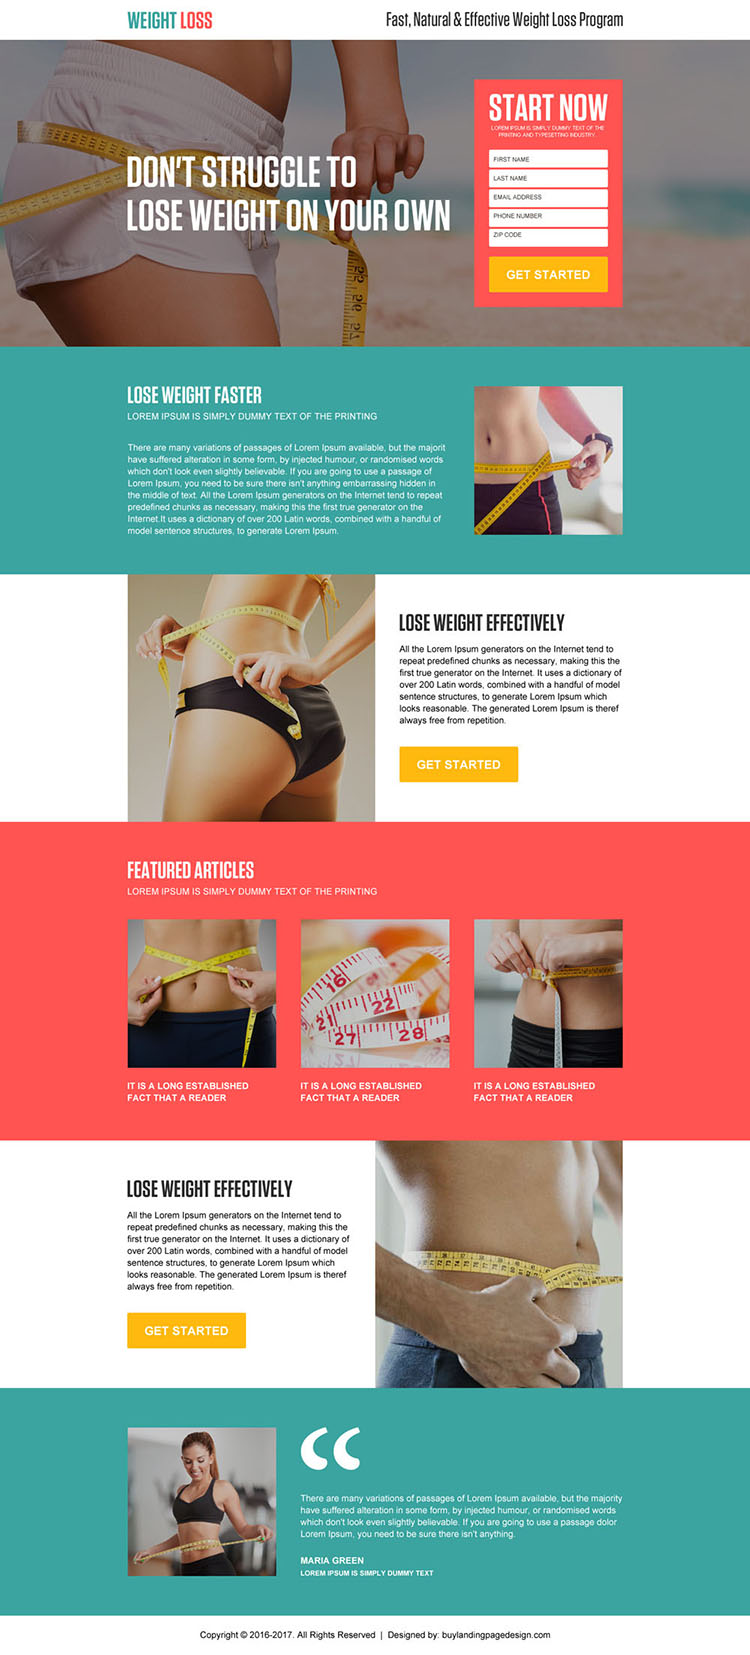 fast and natural weight loss lead generating landing page